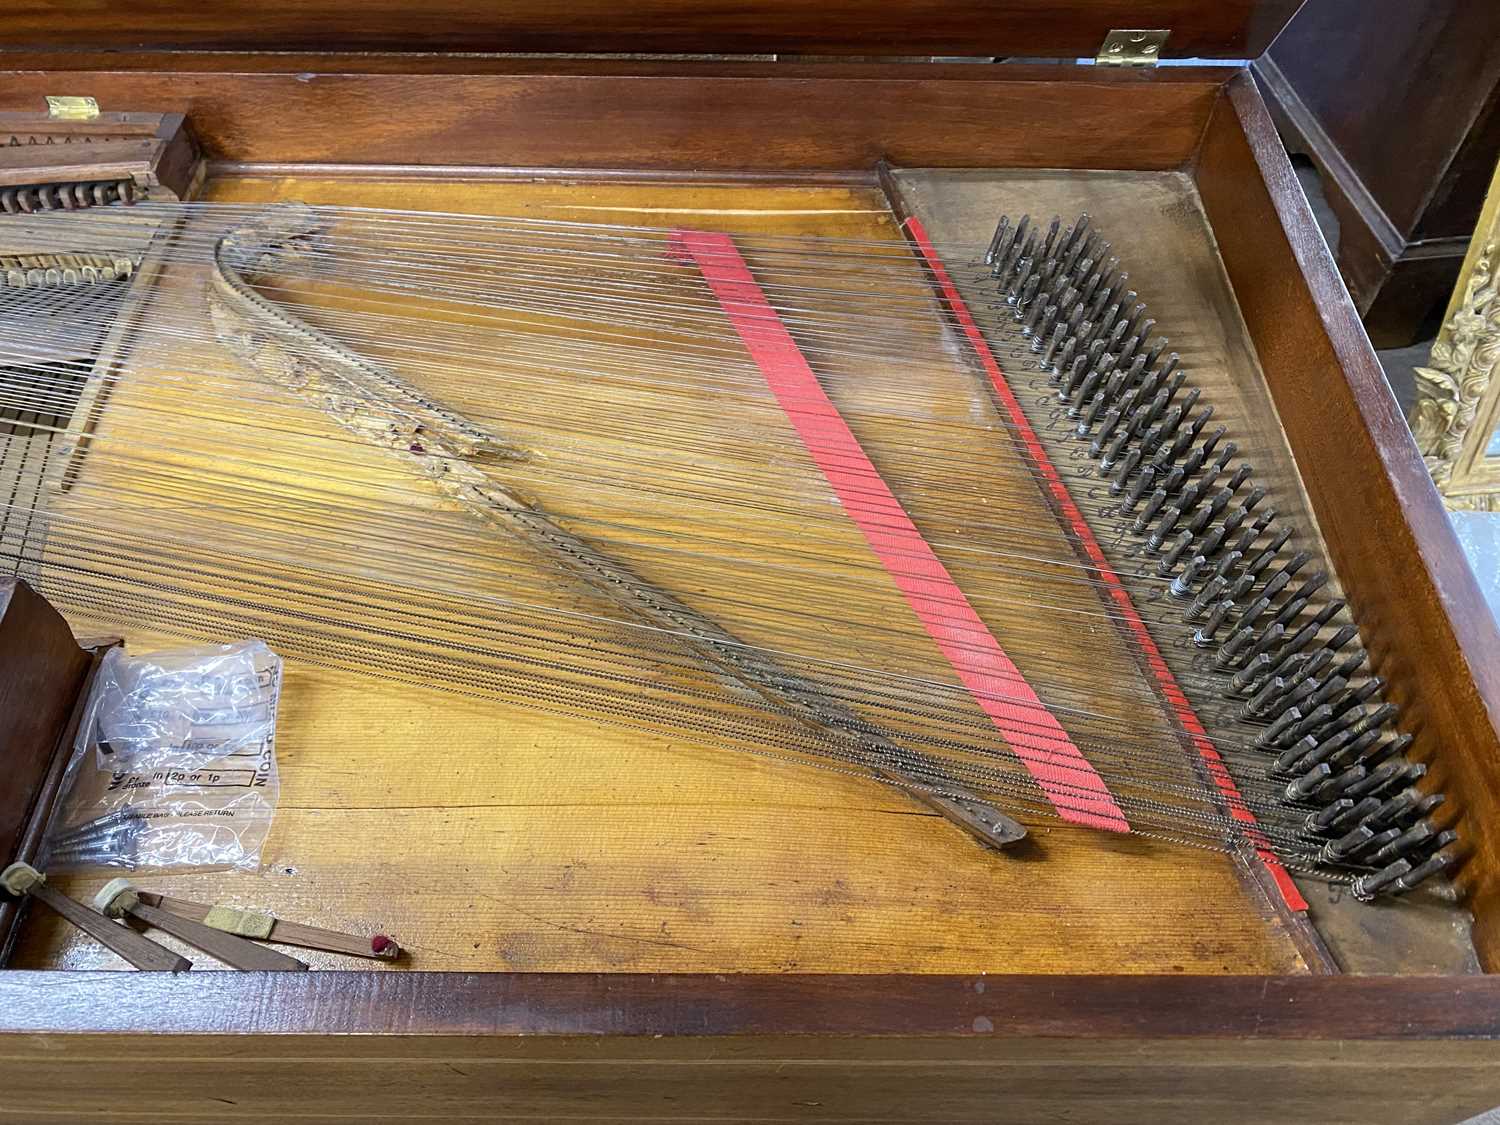 John Broadwood & Sons Makers, Great Putney Street, London, a 19th Century spinet or square piano set - Image 3 of 7